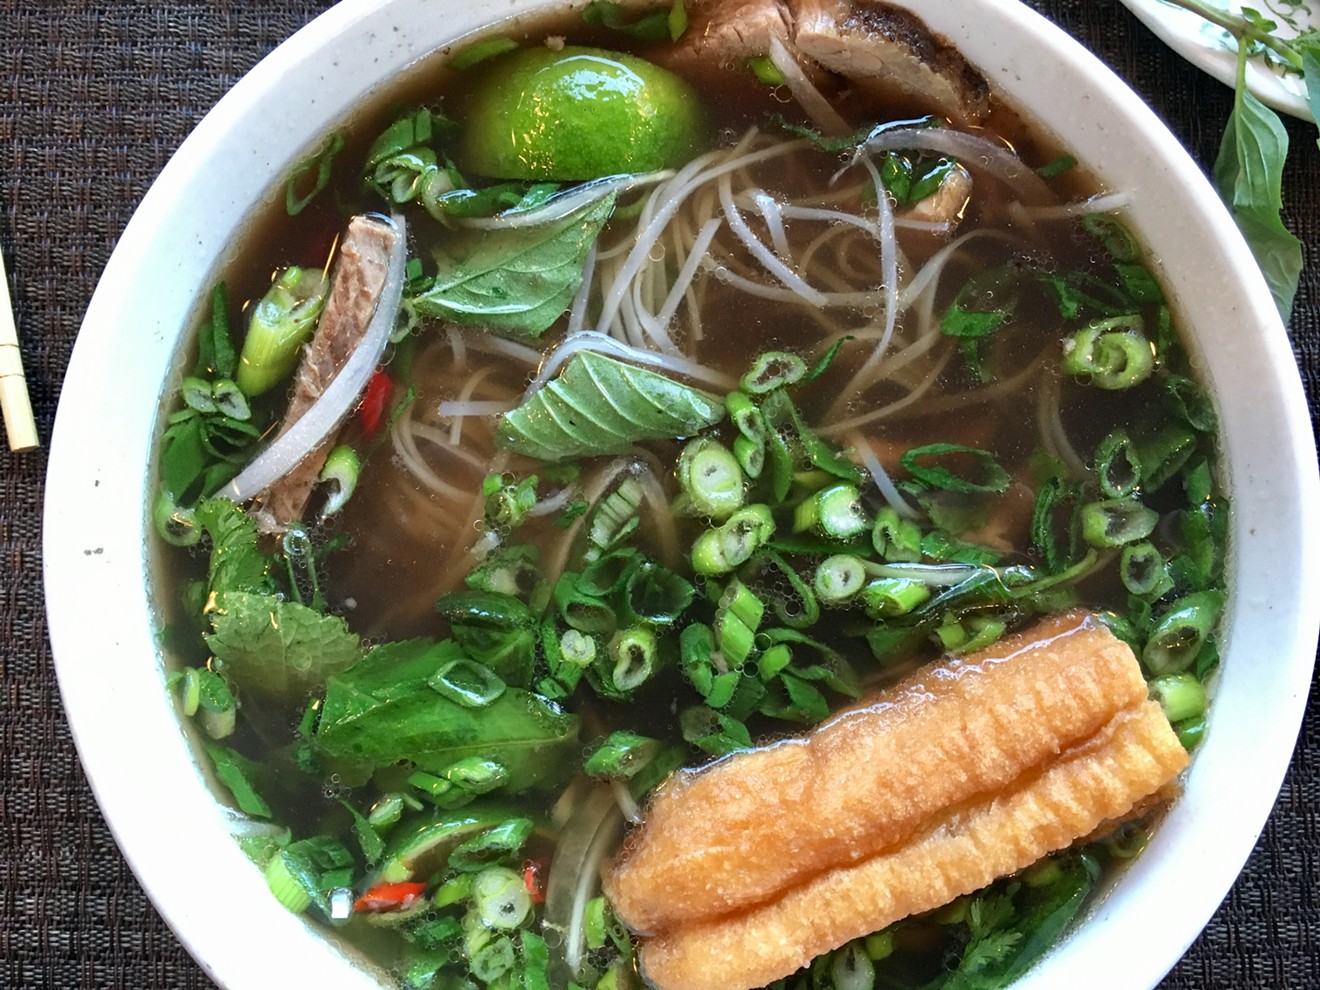 The pho with beef tenderloin is $12 at lunch and is now served in the evening as well.